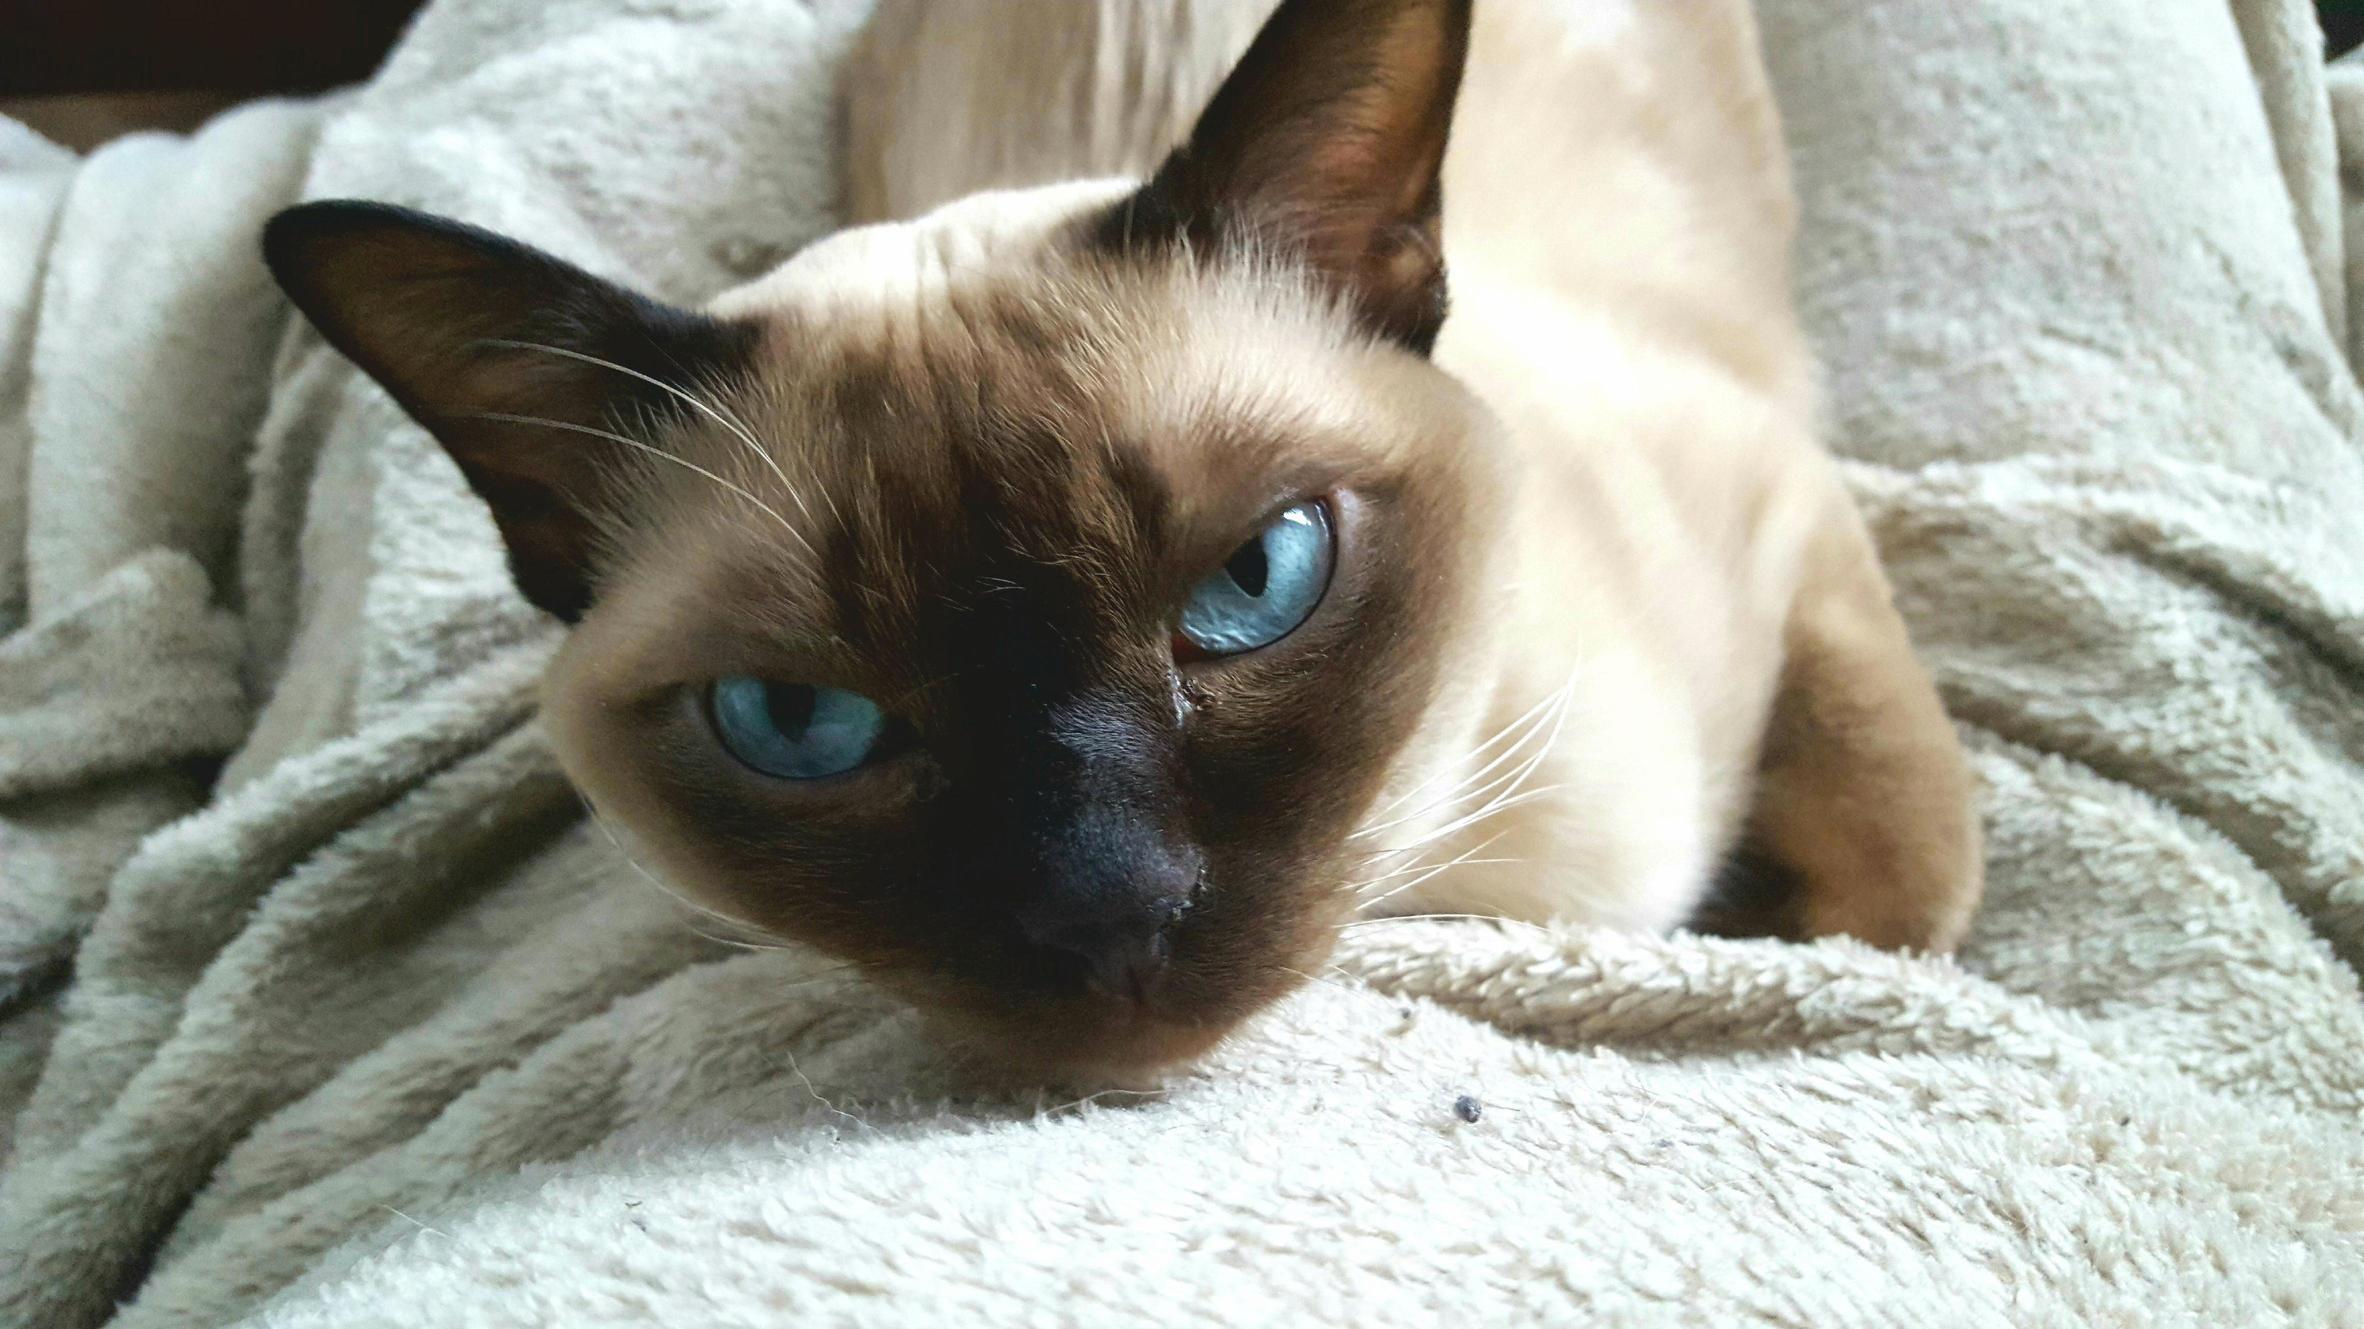 My tonkinese kitty looking cute af